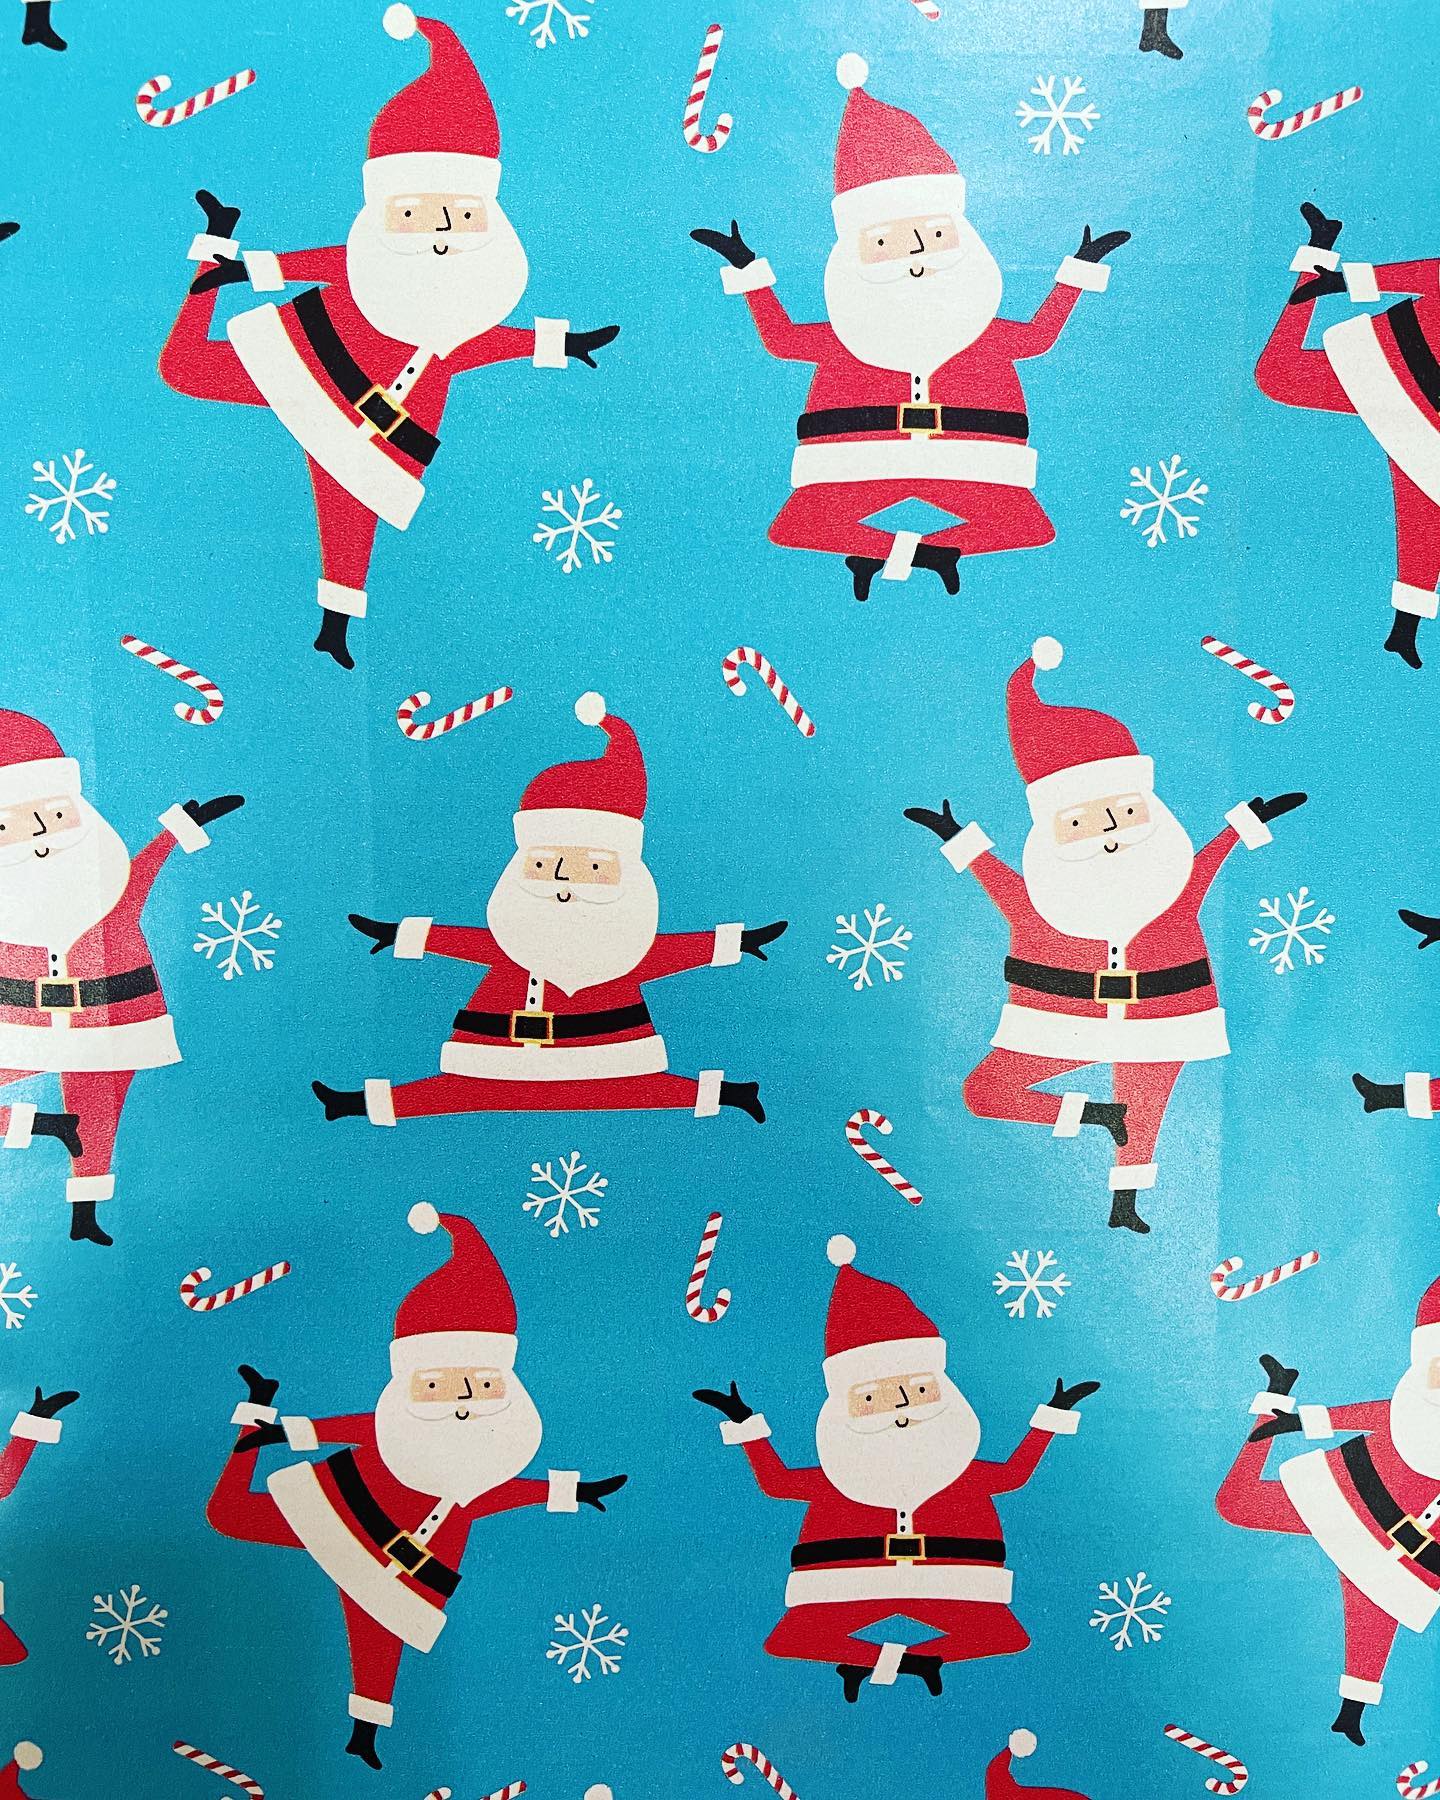 Happy holidays to all our #yogicubs families!

(I totally by accident grabbed some wrapping paper with yoga Santas, how perfect!)

#yogachristmas #happyholidays #familytime #love